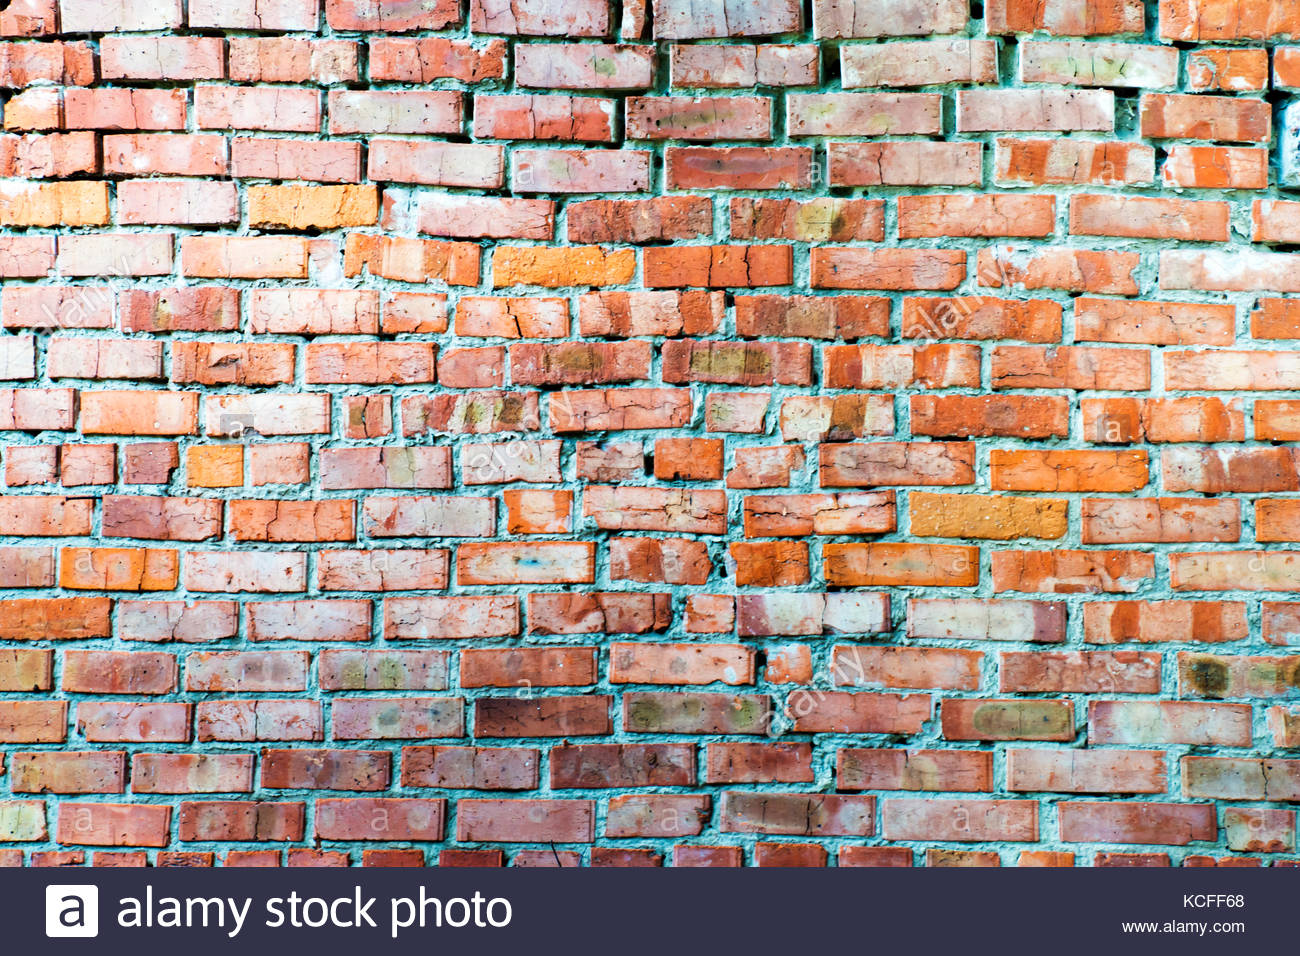 Ugly Old Red Brick Wall Background Stock Photo